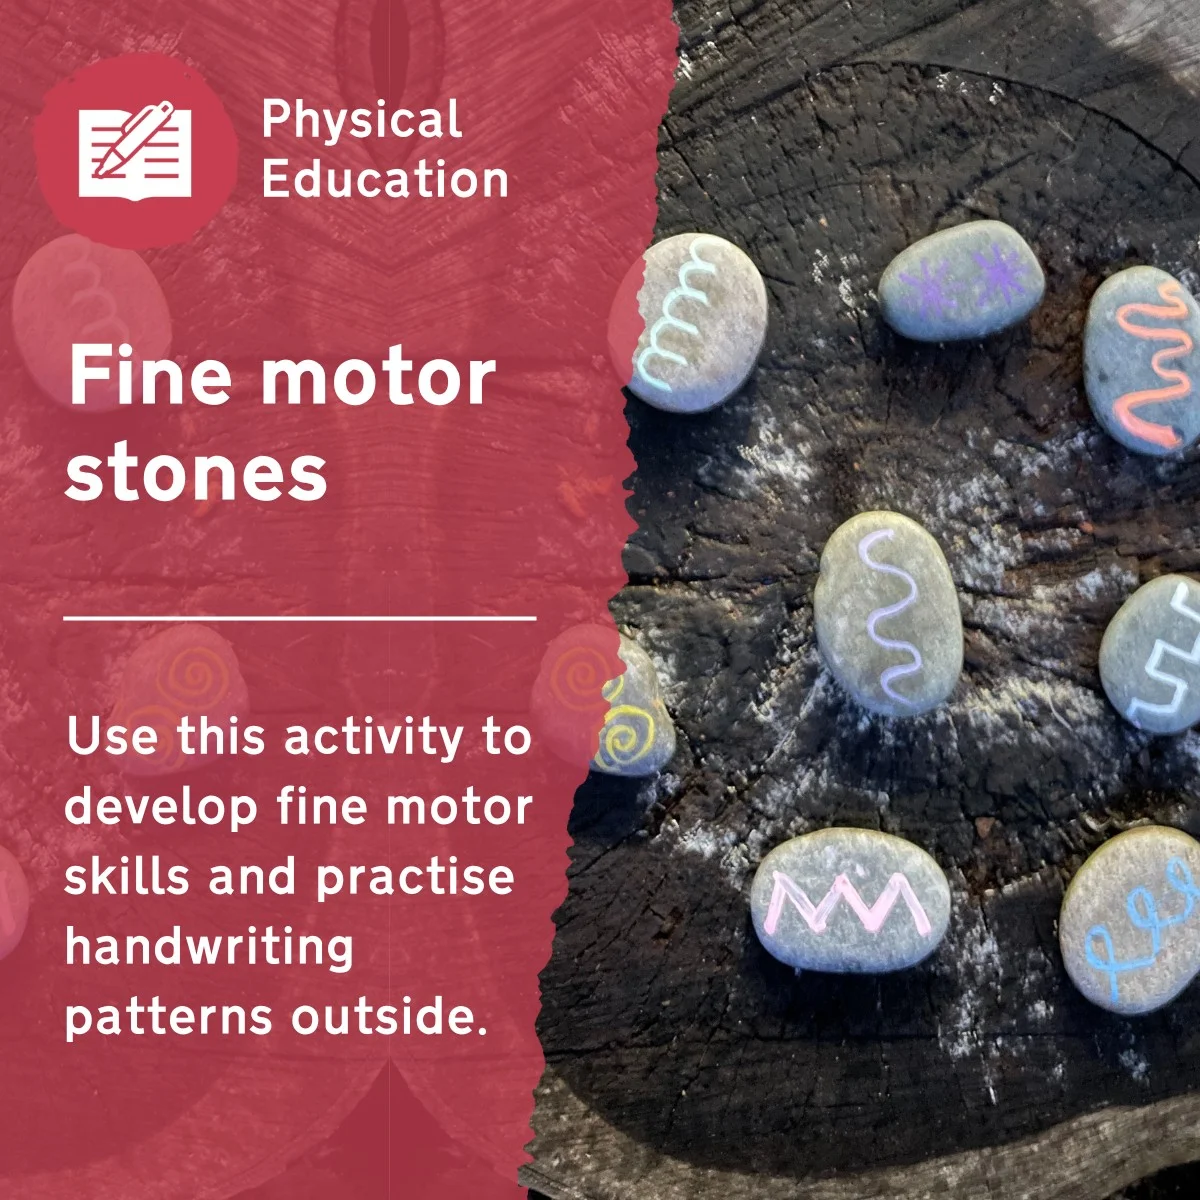 Use this early years activity to develop children's fine motor skills when using mark-making tools. This outdoor lesson idea enables children to creatively practise handwriting patterns.